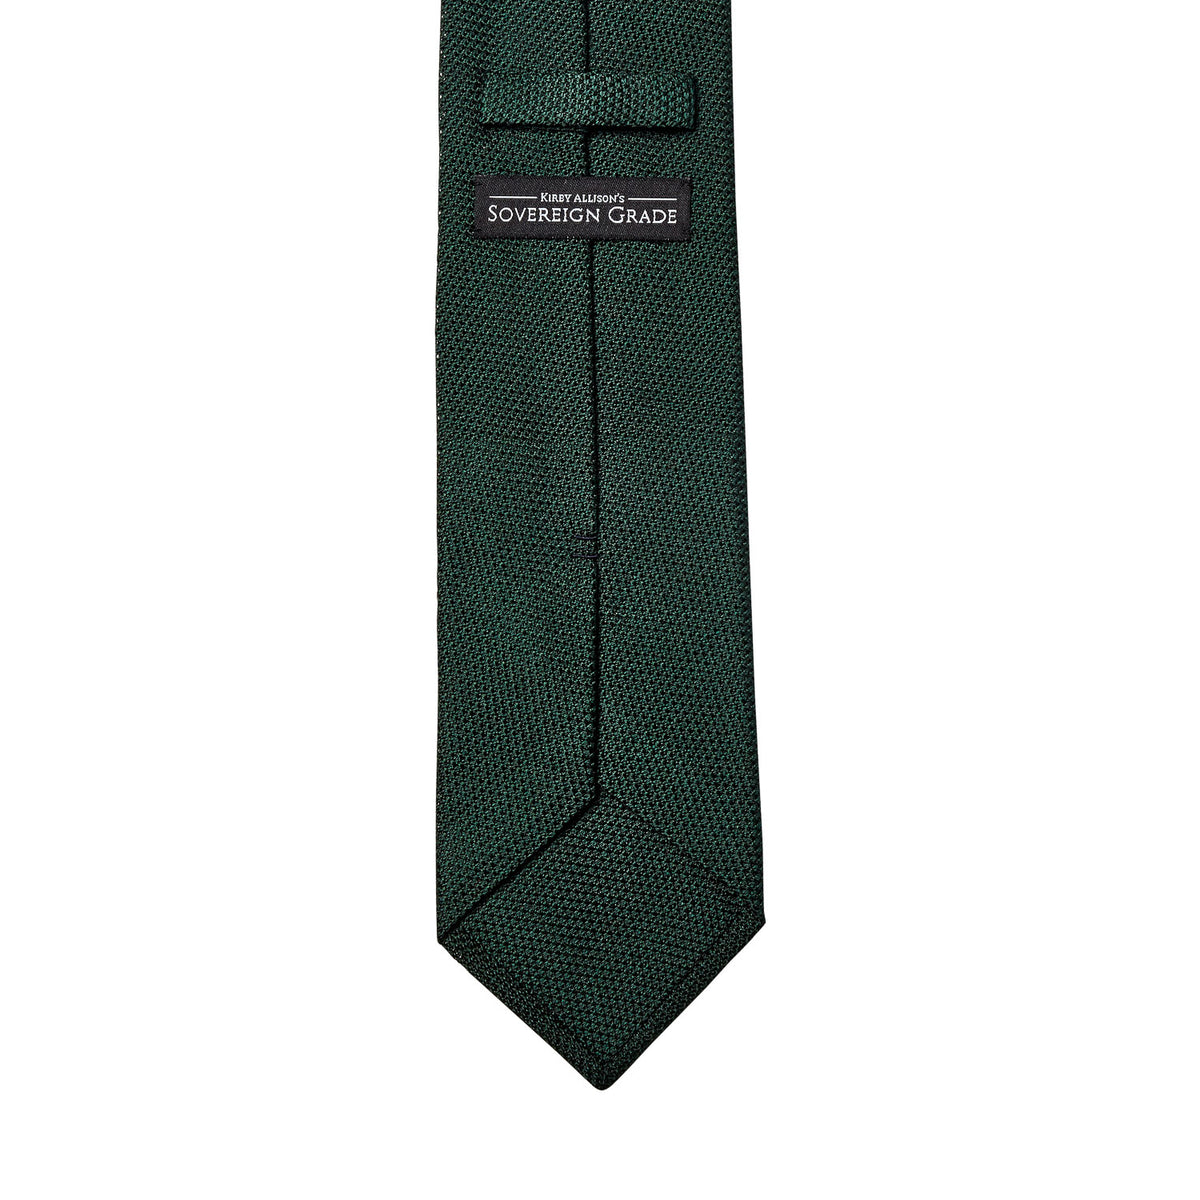 High quality Sovereign Grade Grenadine Fina Emerald Tie handmade in the United Kingdom, exclusively from KirbyAllison.com.